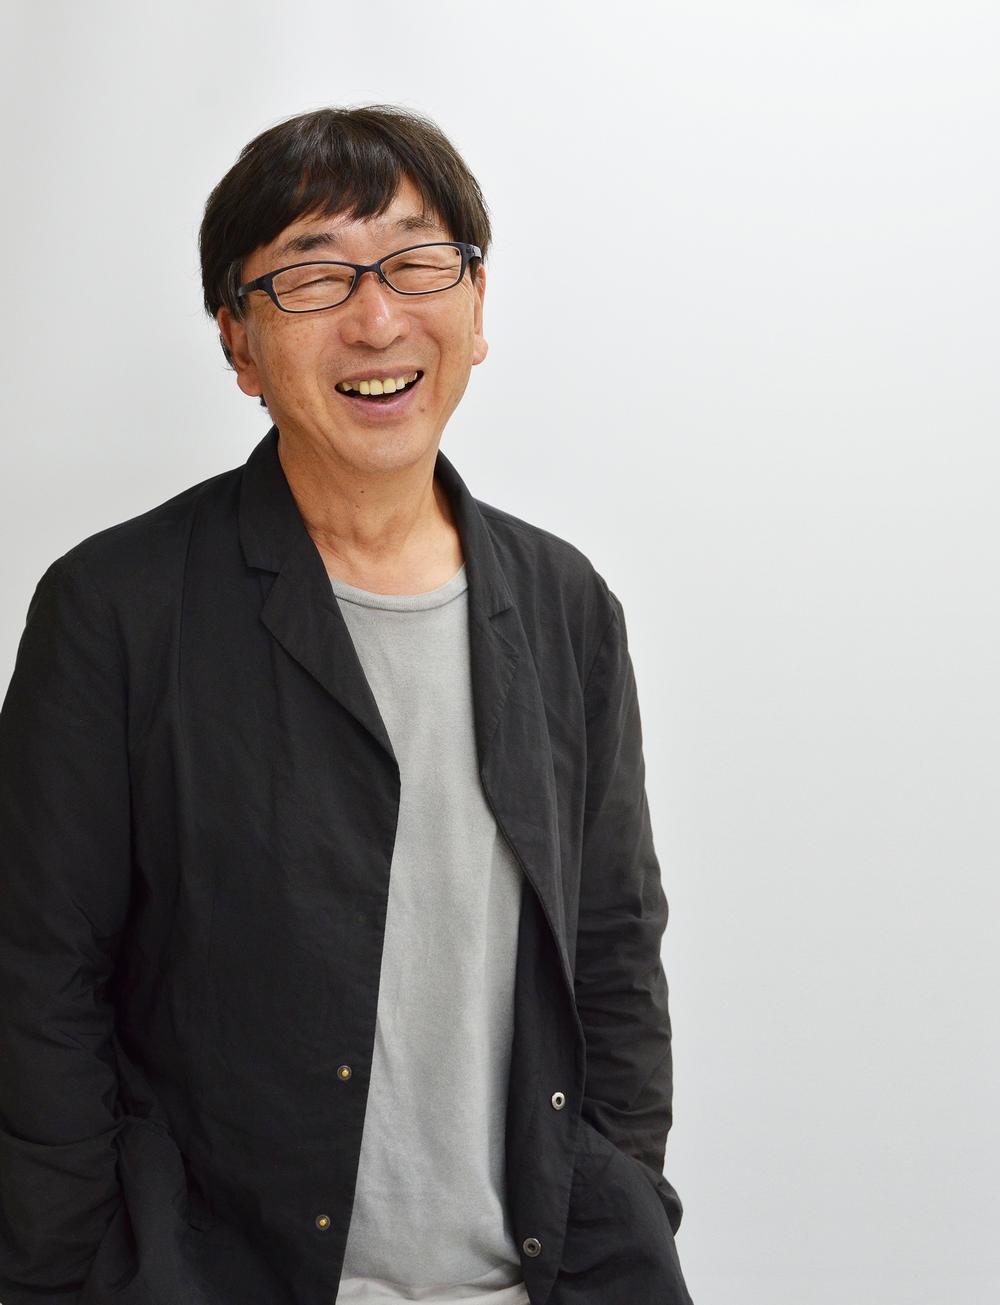 Toyo Ito was born in Seoul in 1941. He studied architecture at the University of Tokyo